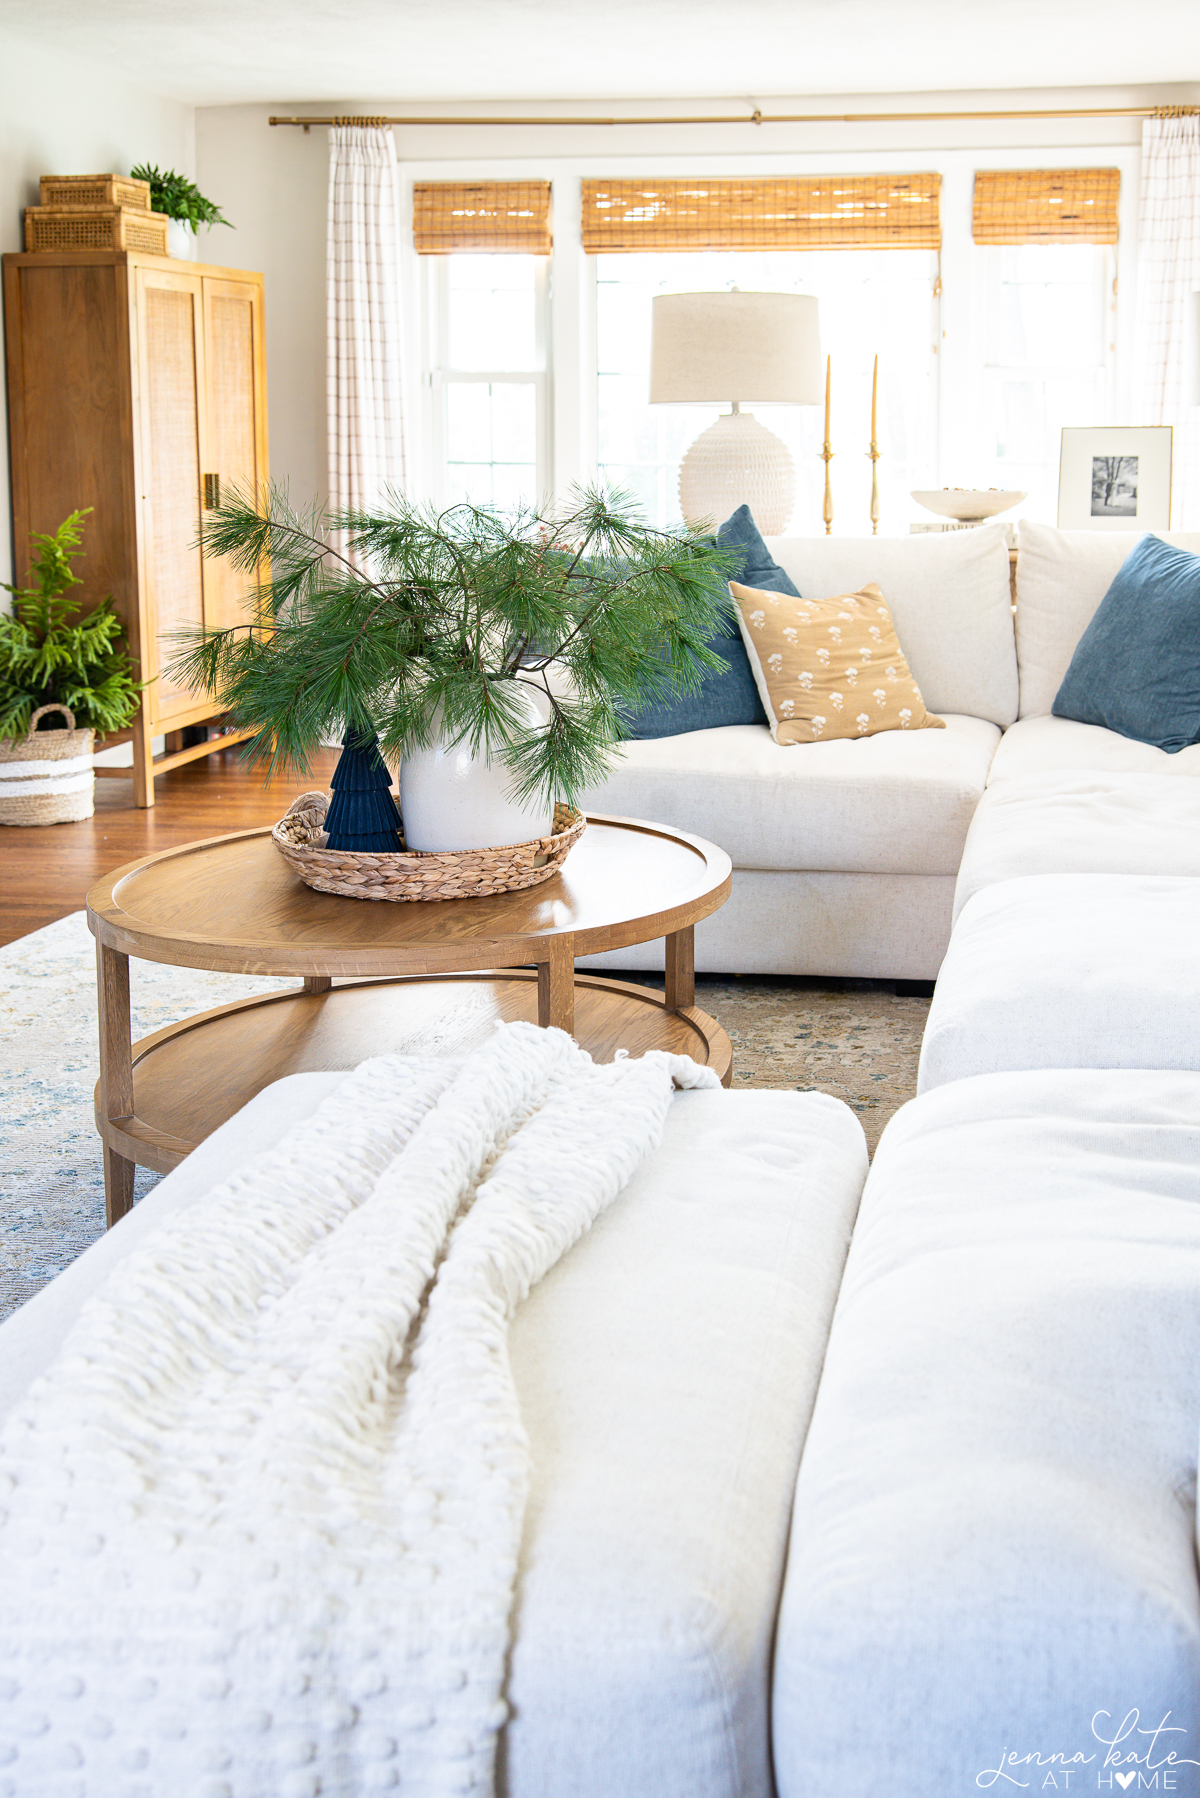 A living room minimally decorated for Christmas with blue and yellow accents.